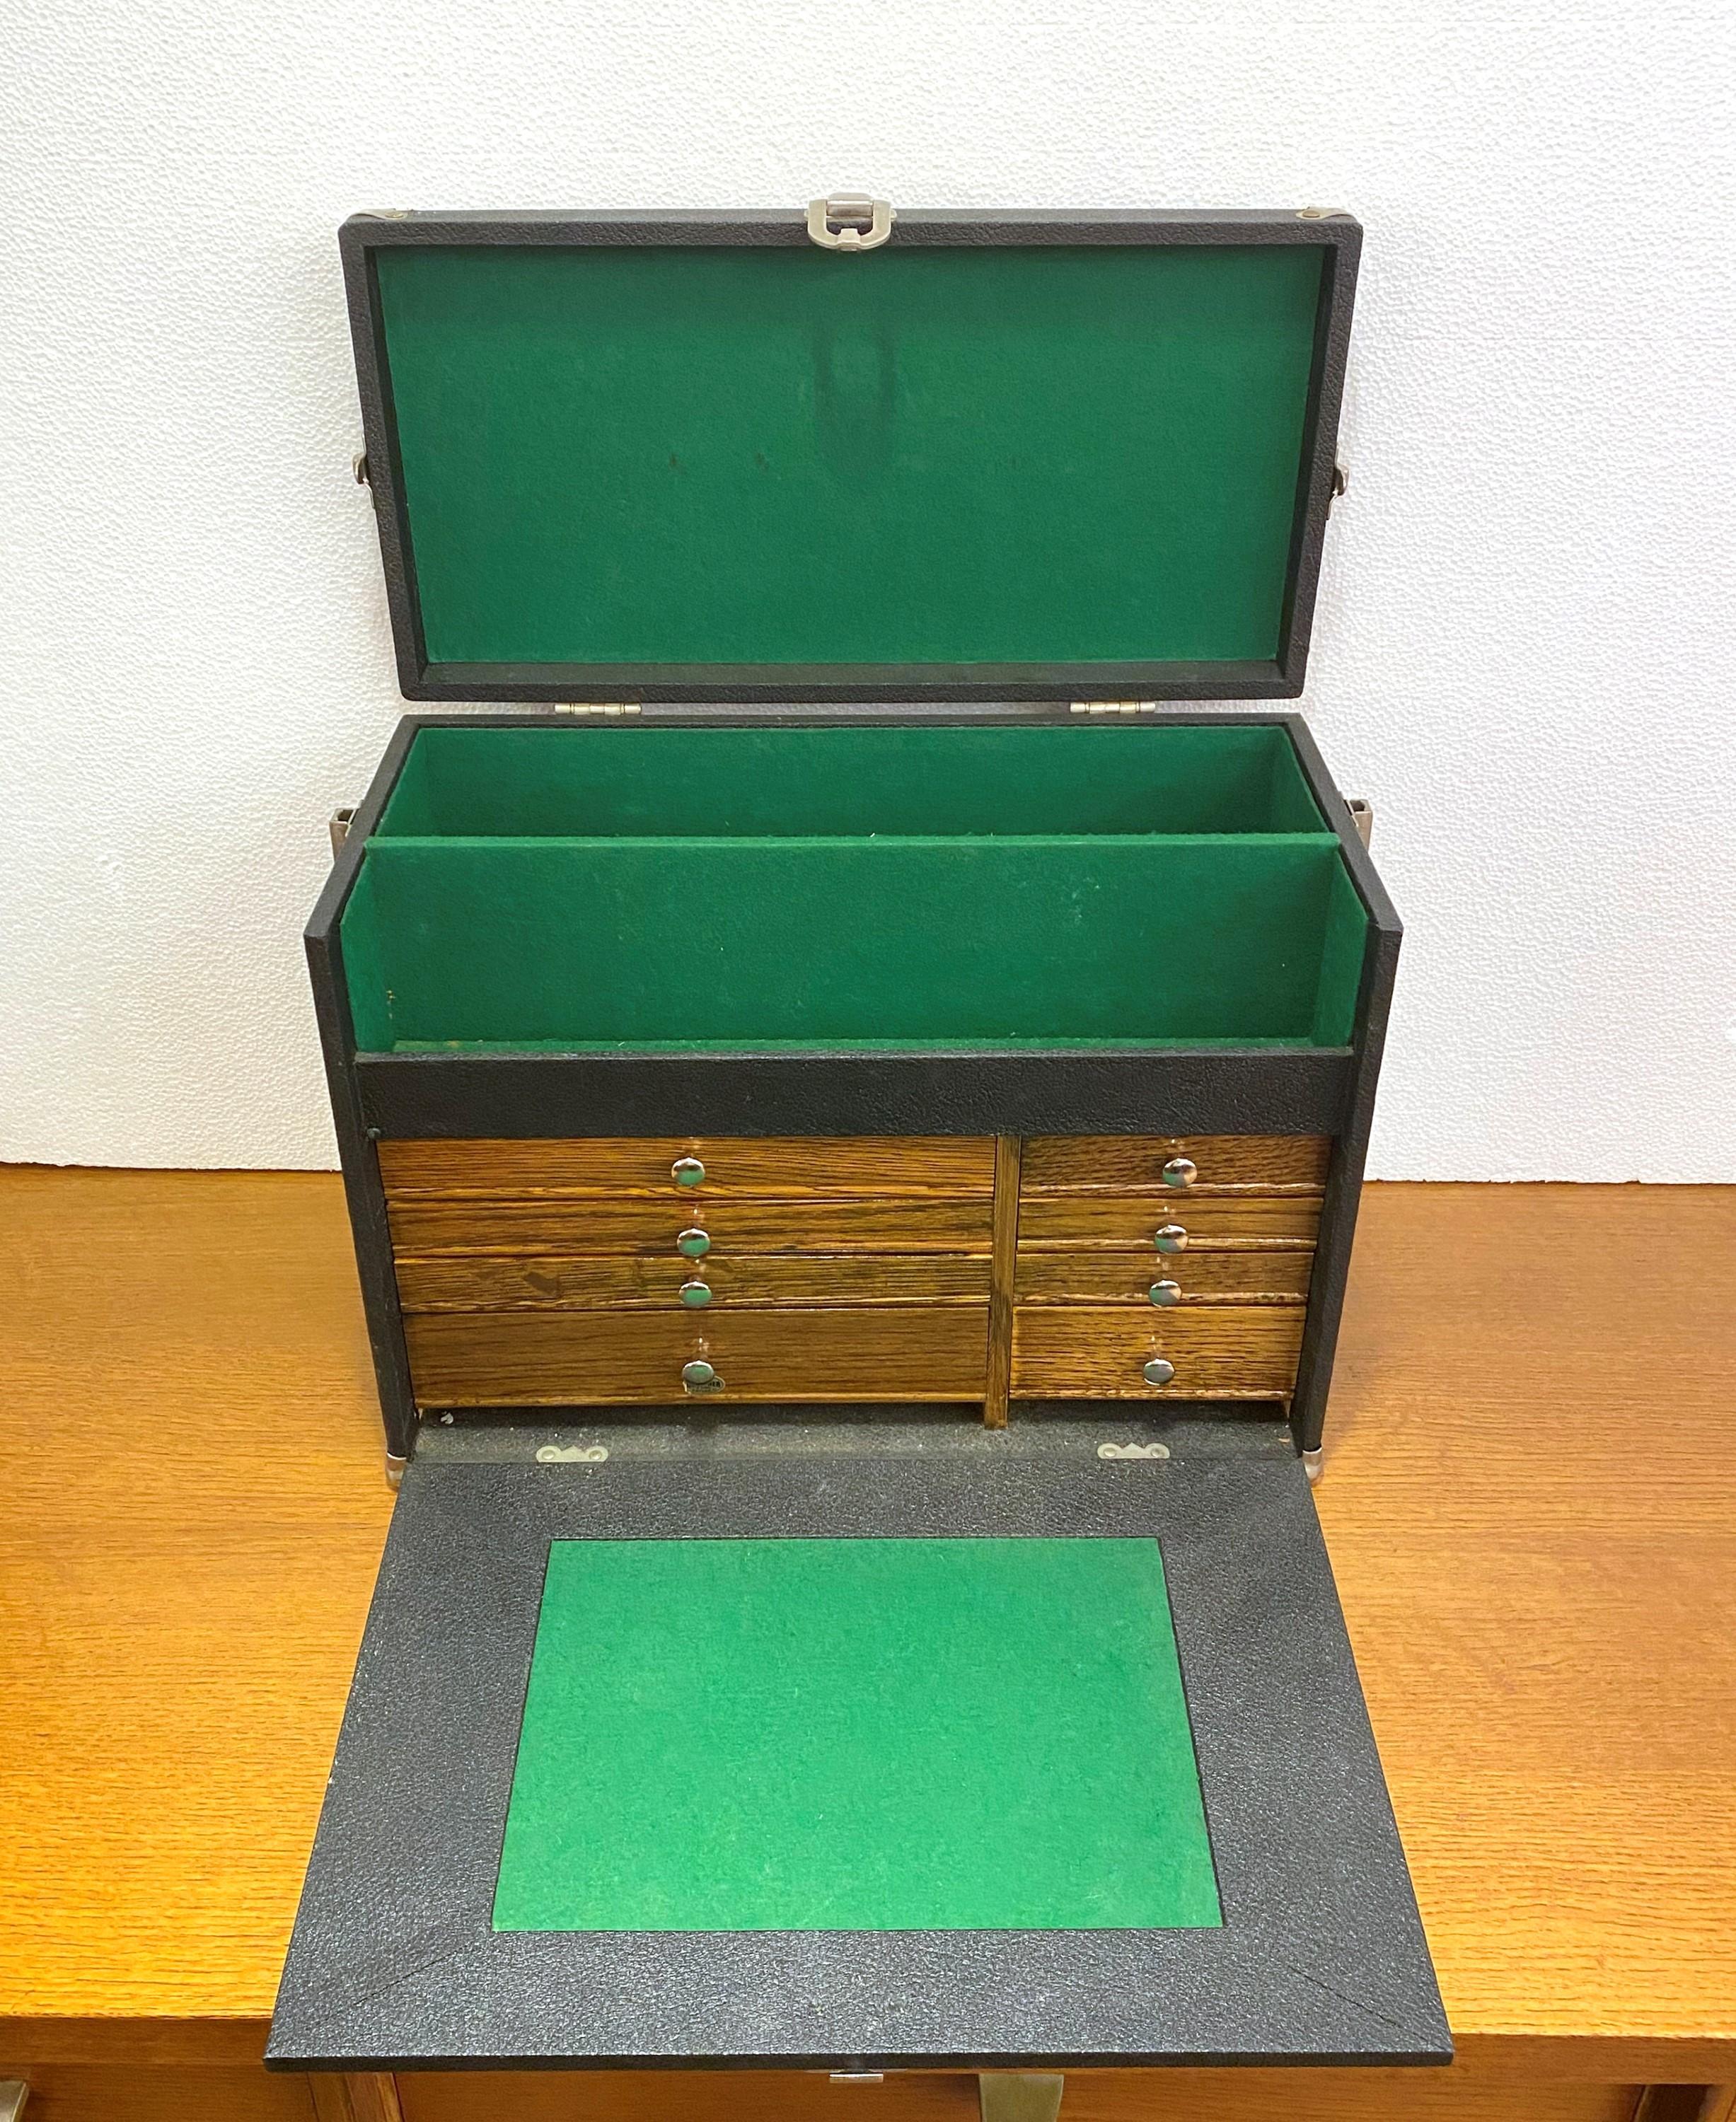 Gerstner & Sons is a renowned American company with a long history of manufacturing high-quality tool chests and wooden cases. The company was founded in 1906 by Harry Gerstner in Dayton, Ohio. Initially, they specialized in creating tool chests for